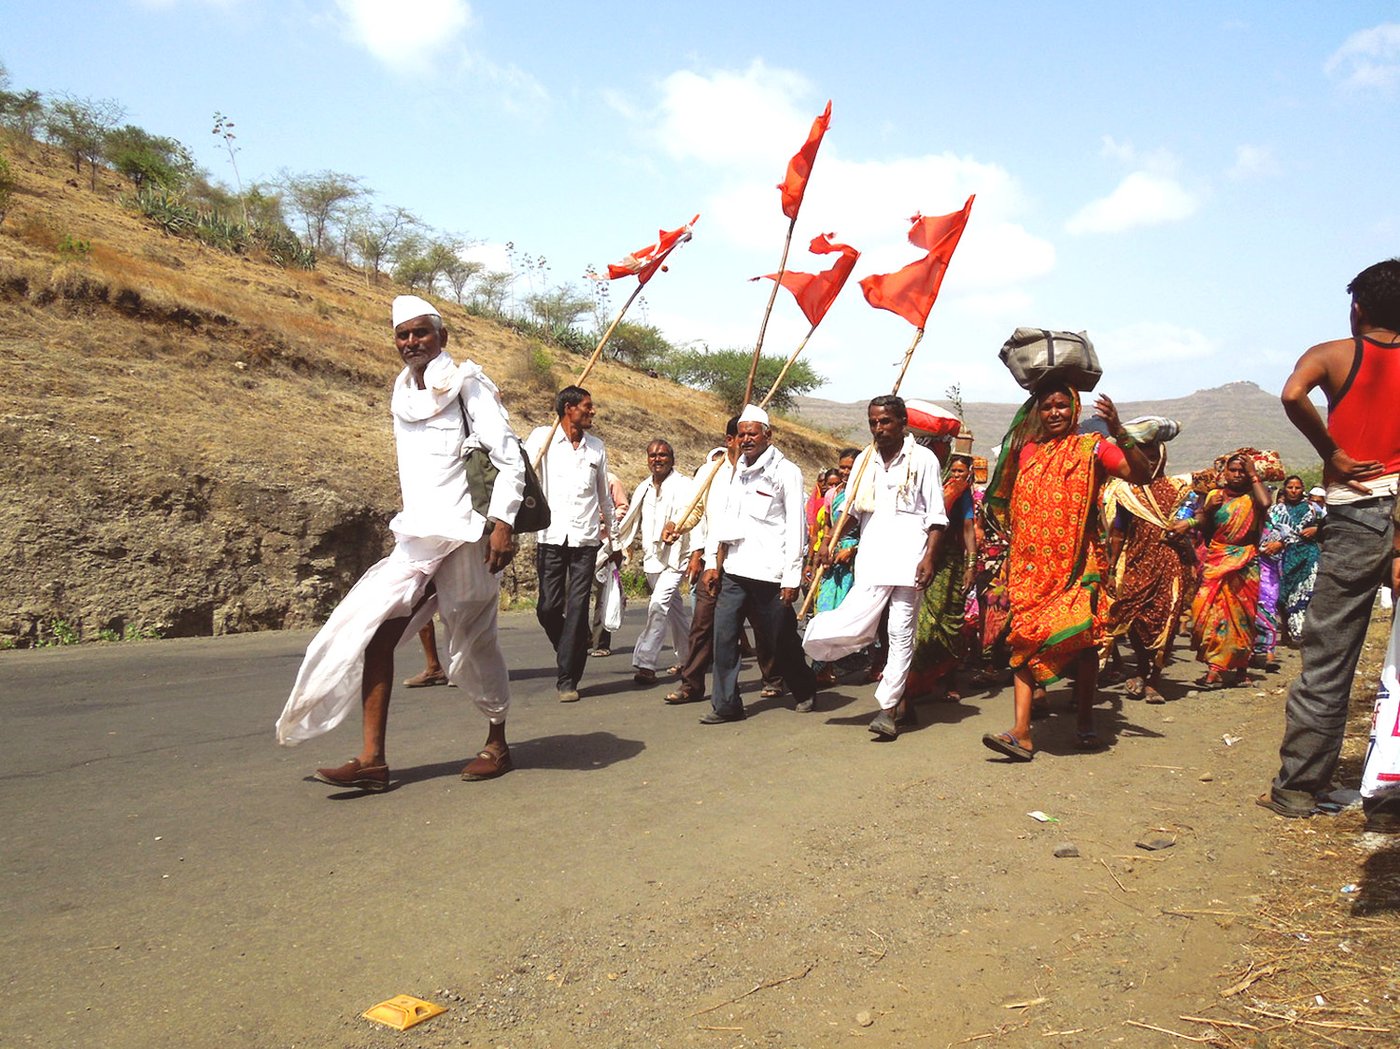 In July every year, lakhs of warkaris from all over Maharashtra walk a distance of around 240 kilometres from Dehu and Alandi to ‘meet’ their beloved Lord Vithoba and Rakhumai in Pandharpur in Solapur district. 